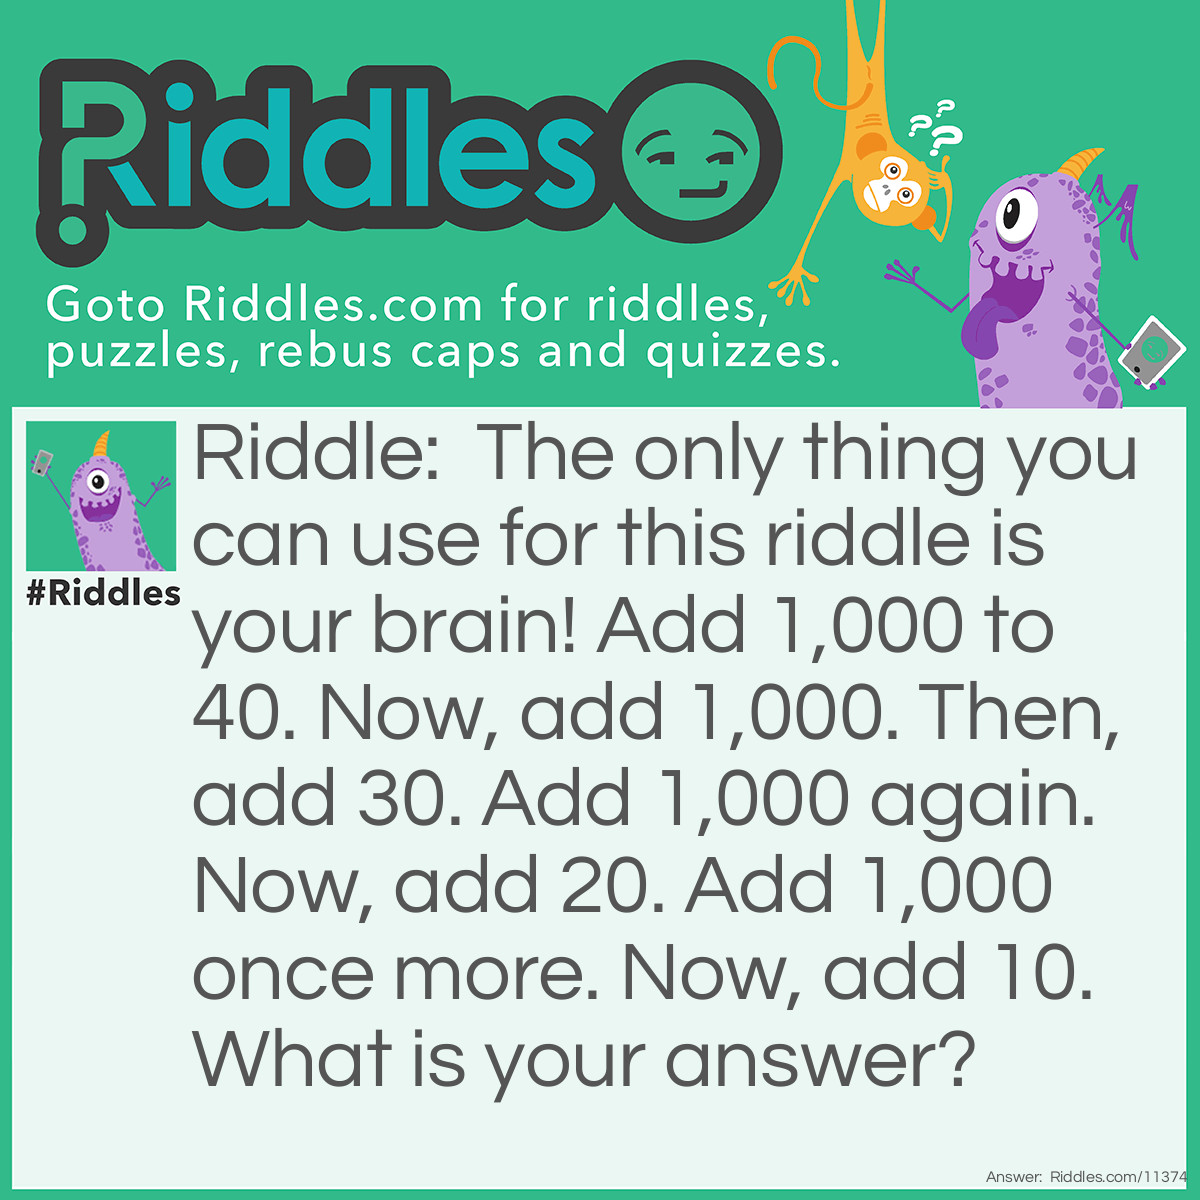 Riddle: The only thing you can use for this riddle is your brain! Add 1,000 to 40. Now, add 1,000. Then, add 30. Add 1,000 again. Now, add 20. Add 1,000 once more. Now, add 10. What is your answer? Answer: Is it 5,000? Sorry, but that's wrong! The right answer is 4,100. Four 1,000s do add up to 4,000…but 40 + 30 + 20 + 10 is 100, not 1,000. And 4,000 + 100 is not 5,000; it's 4,100; therefore, the correct answer is 4,100.